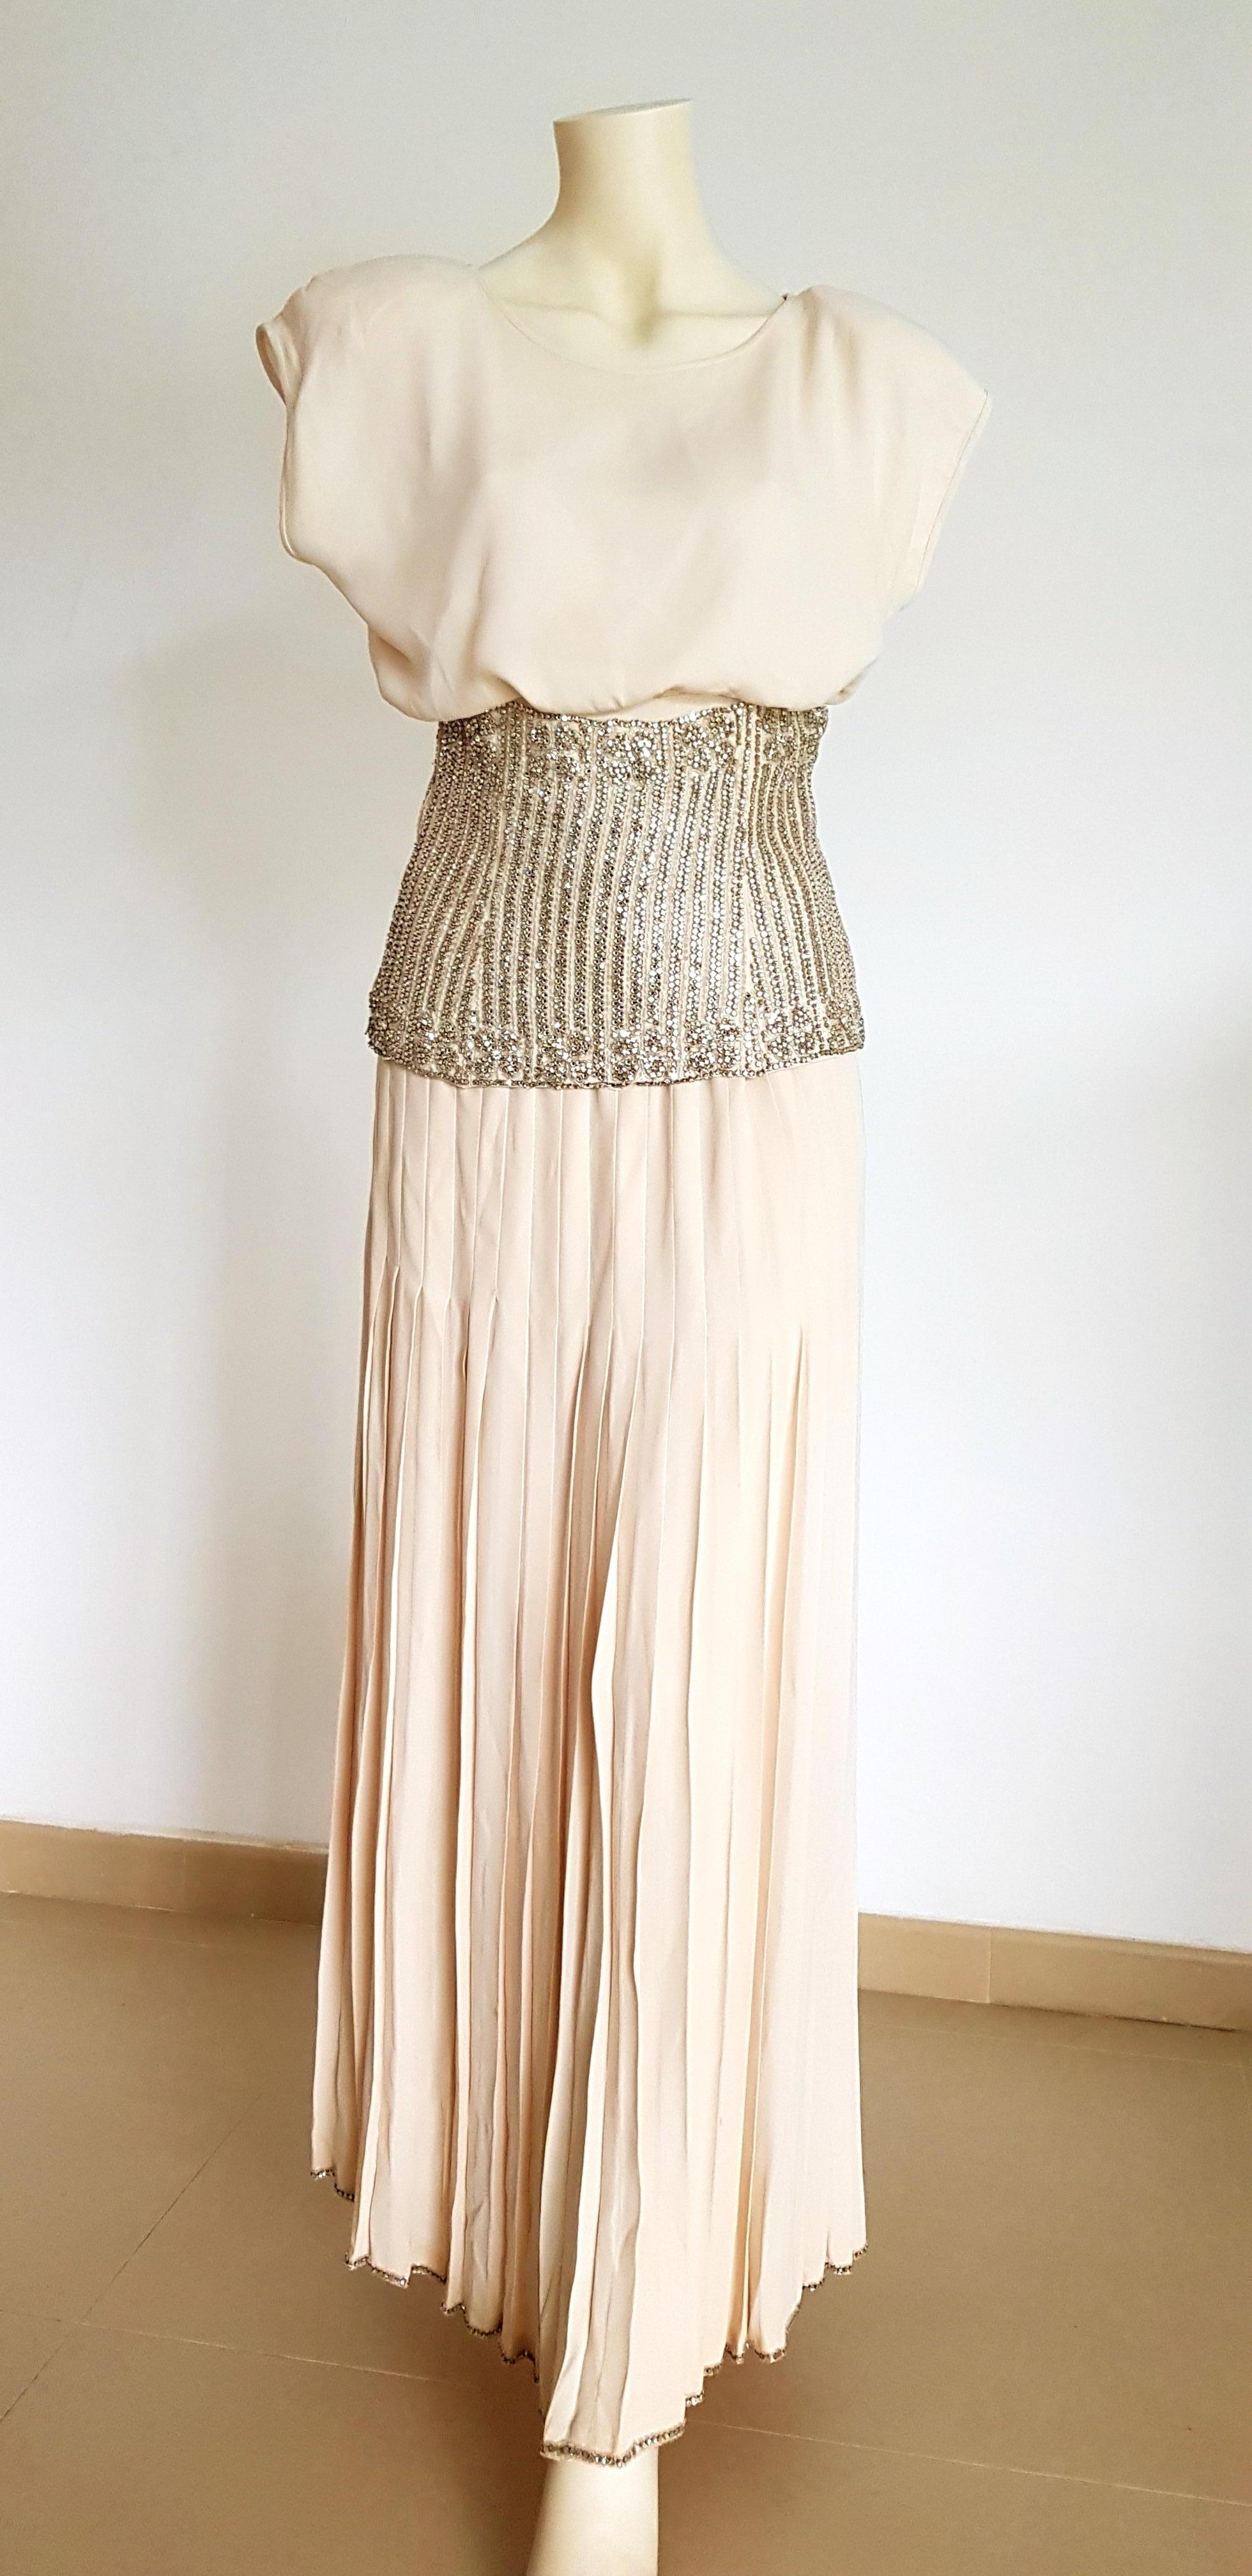 VALENTINO Haute Couture silk top and skirt, swarovski diamonds band combined with the top, evening dress - Unworn.
..
SIZE: equivalent to about Small / Medium, please review approx measurements as follows in cm. 
TOP: lenght 60 with the band, chest